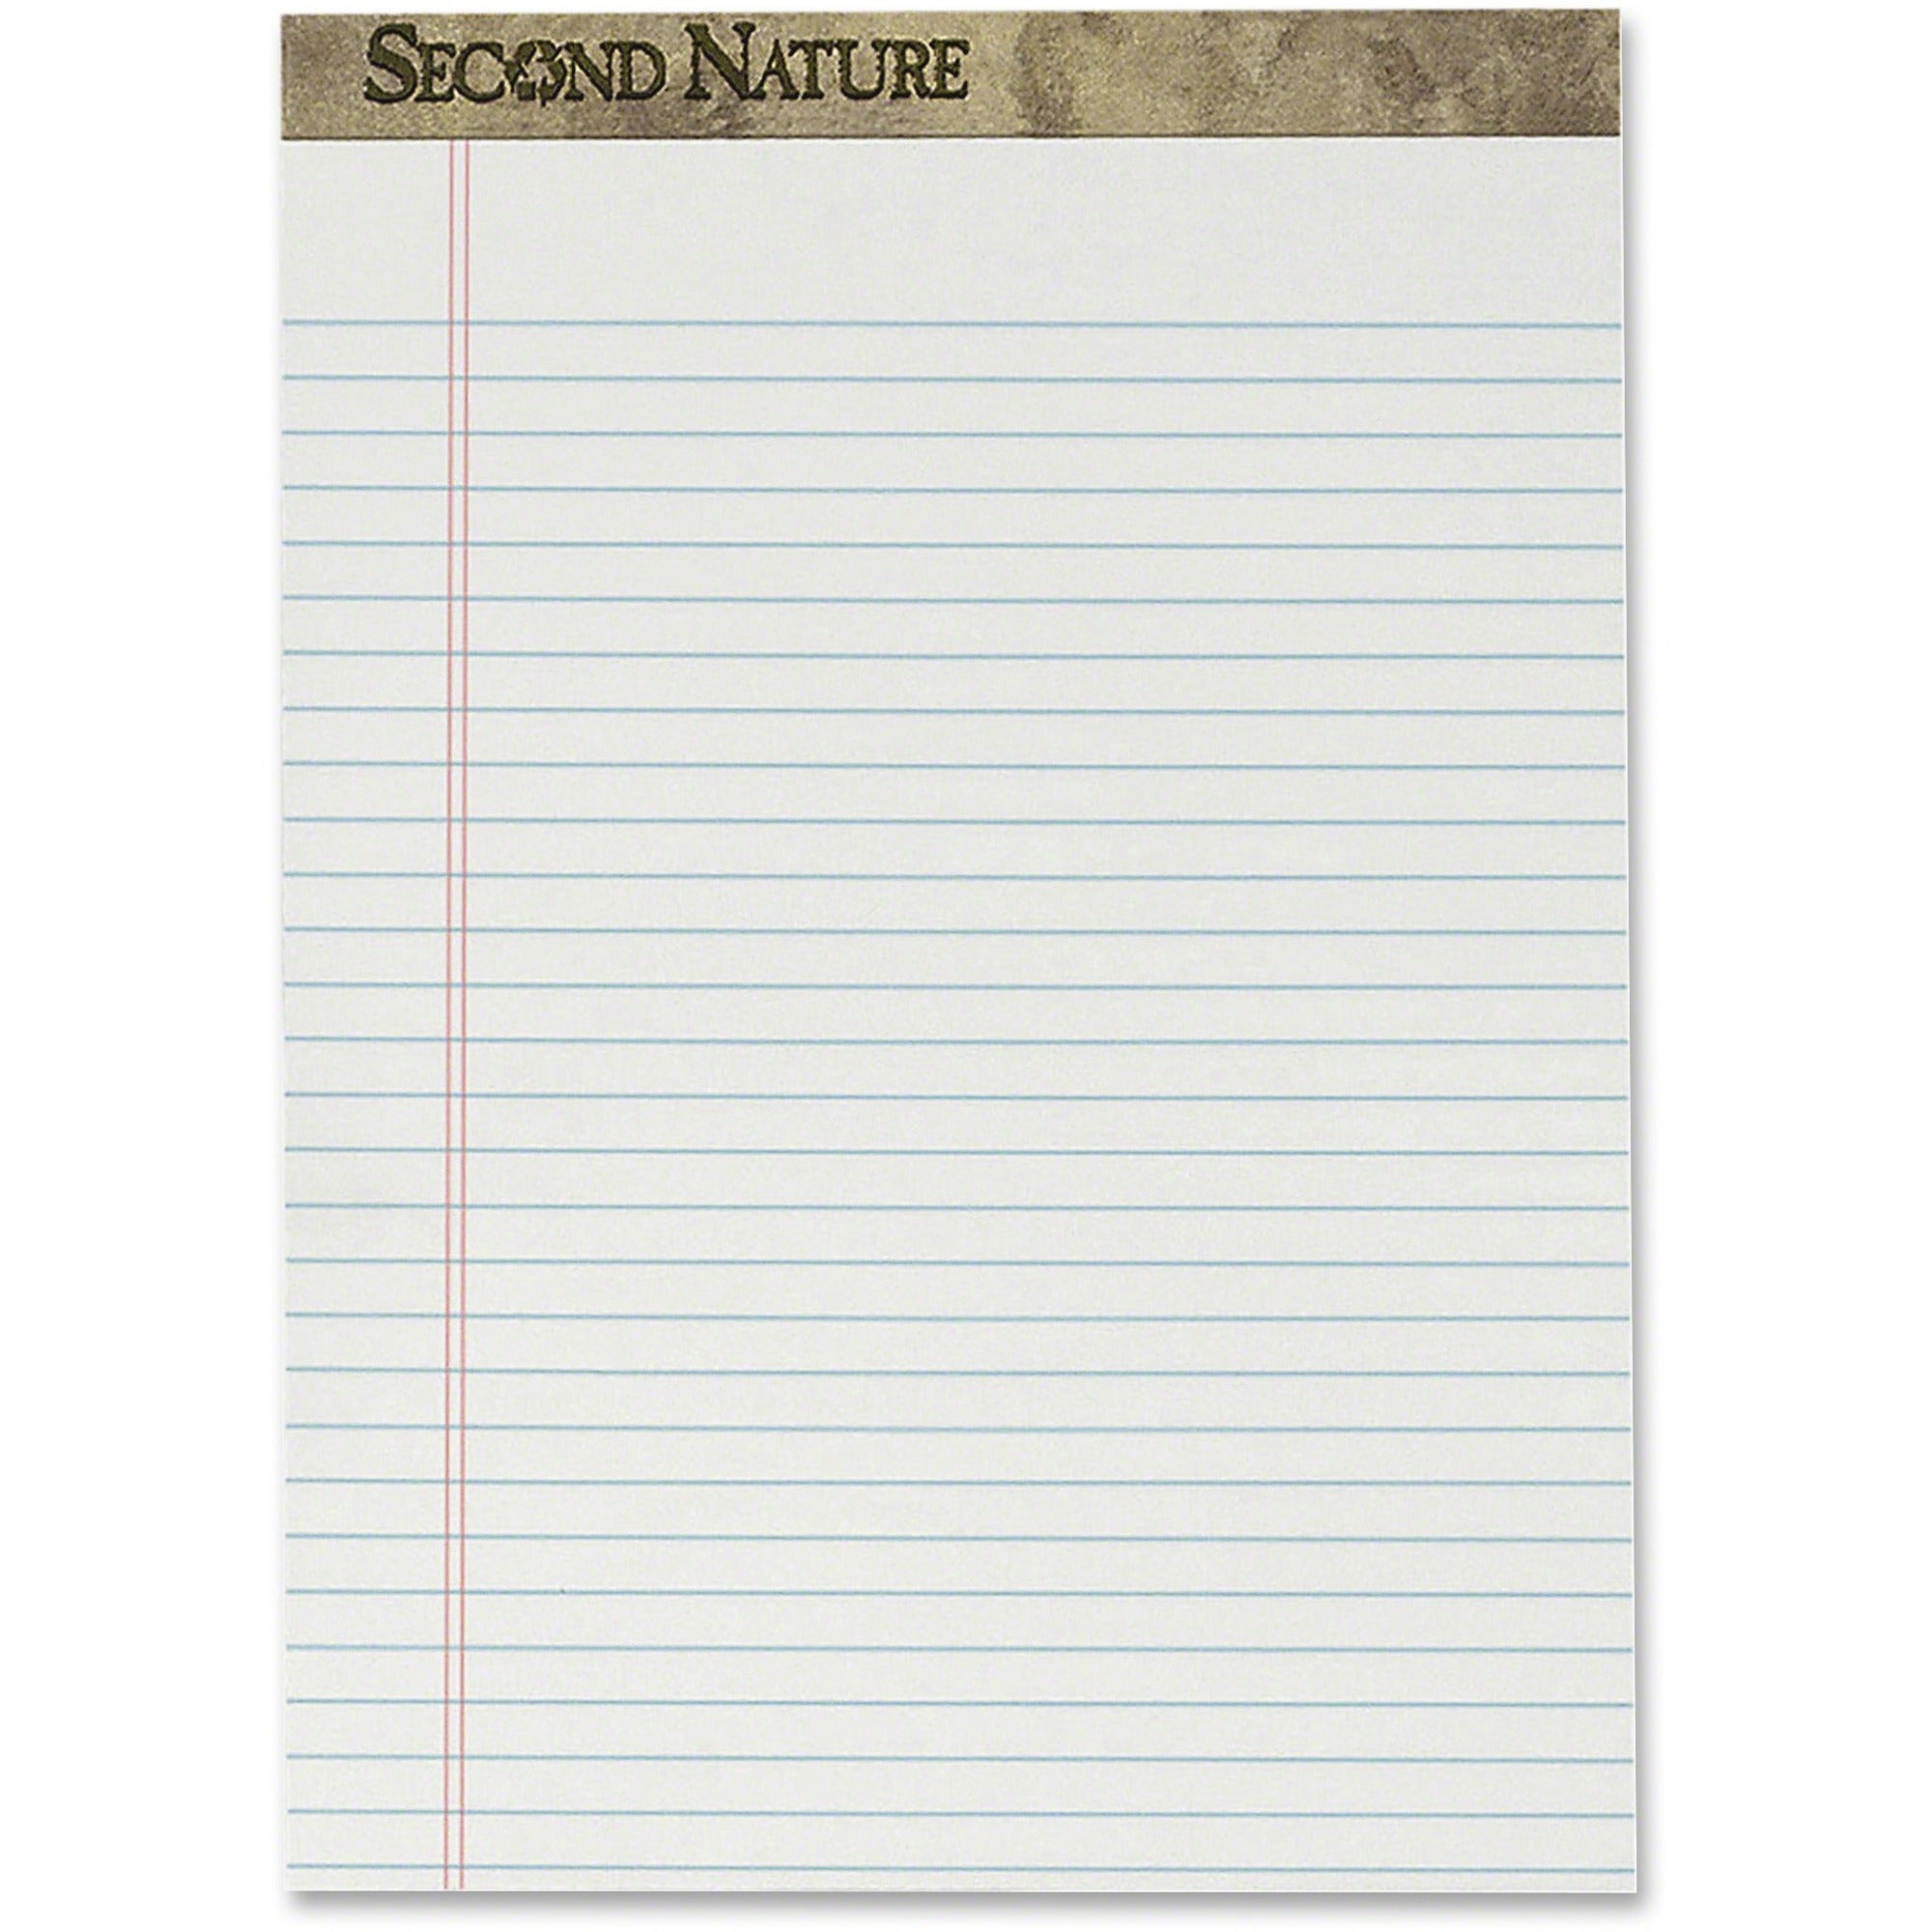 TOPS Second Nature Legal Pads - 50 Sheets - Ruled Red Margin - 18 lb Basis Weight - 8 1/2" x 11 3/4" - 2.50" x 11.8" x 8.5" - White Paper - Bleed Resistant, Perforated, Environmentally Friendly, Acid-free - Recycled - 1 Dozen - 